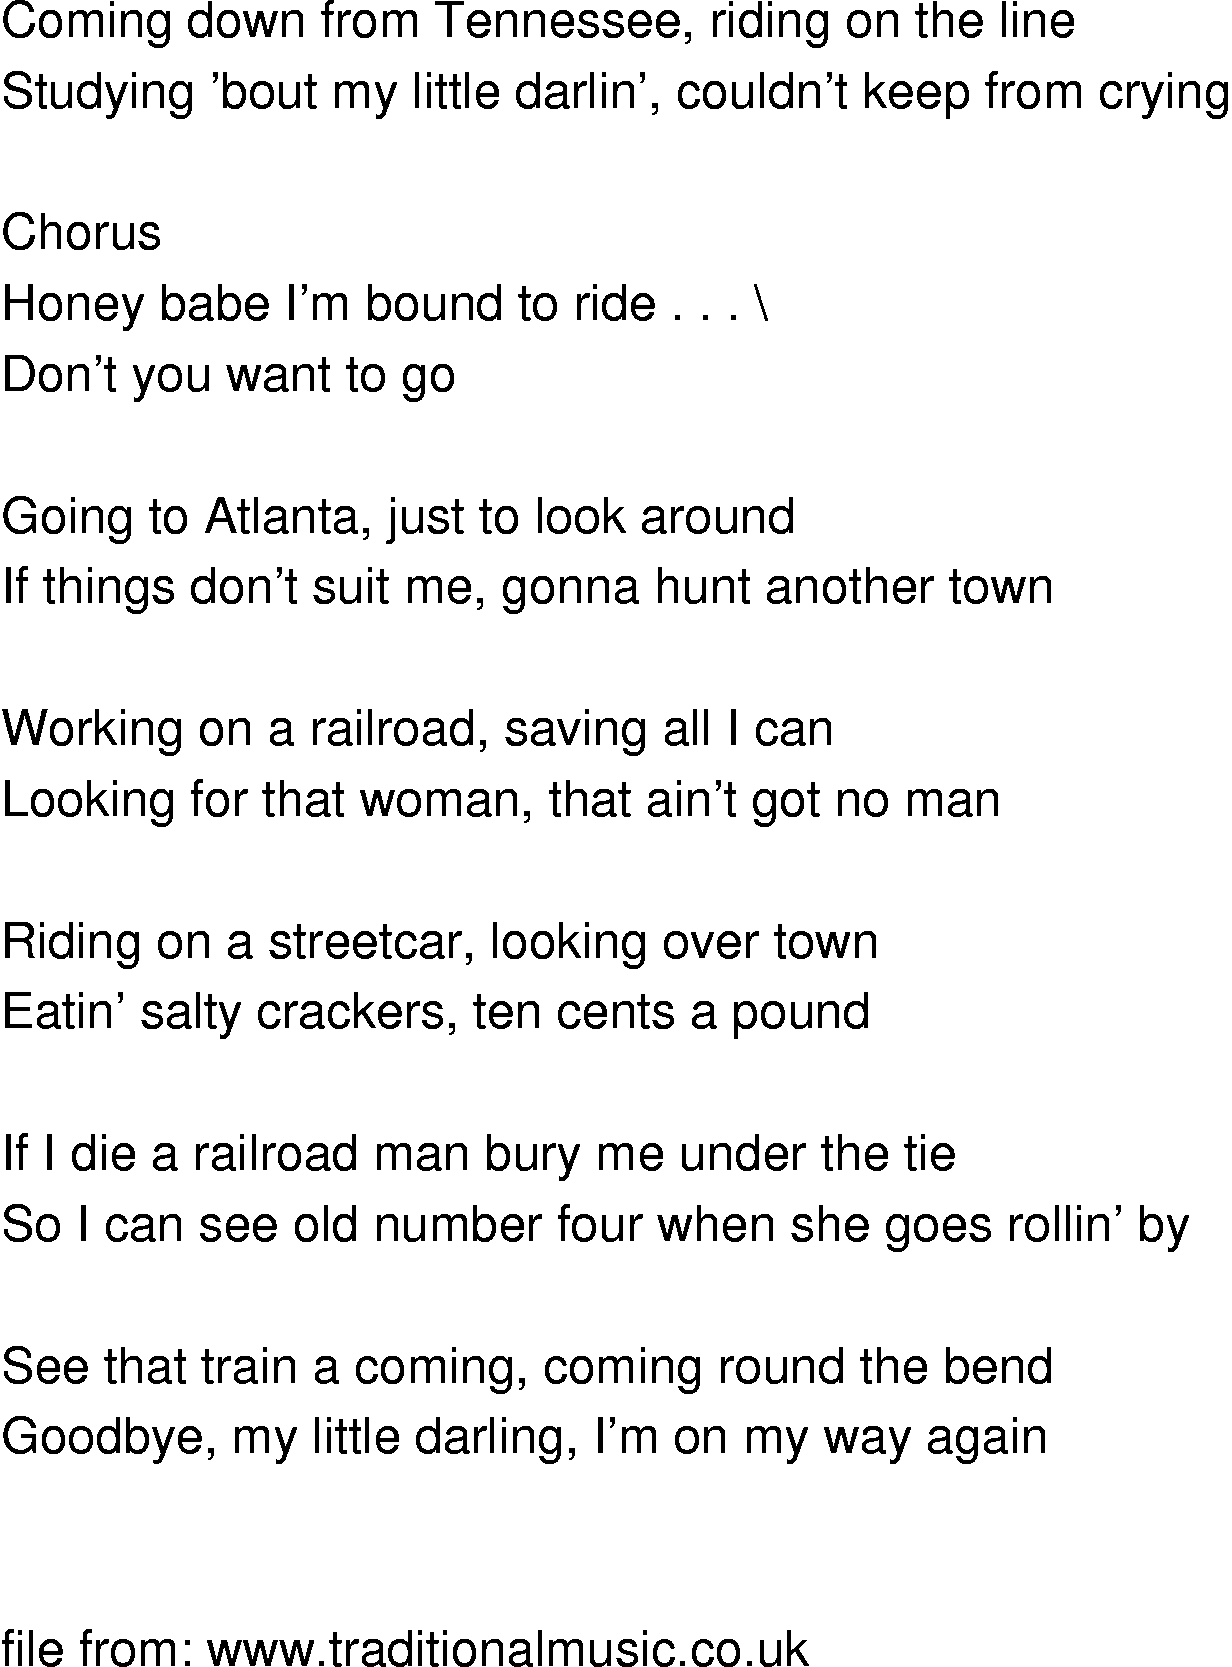 Old-Time (oldtimey) Song Lyrics - bound to ride